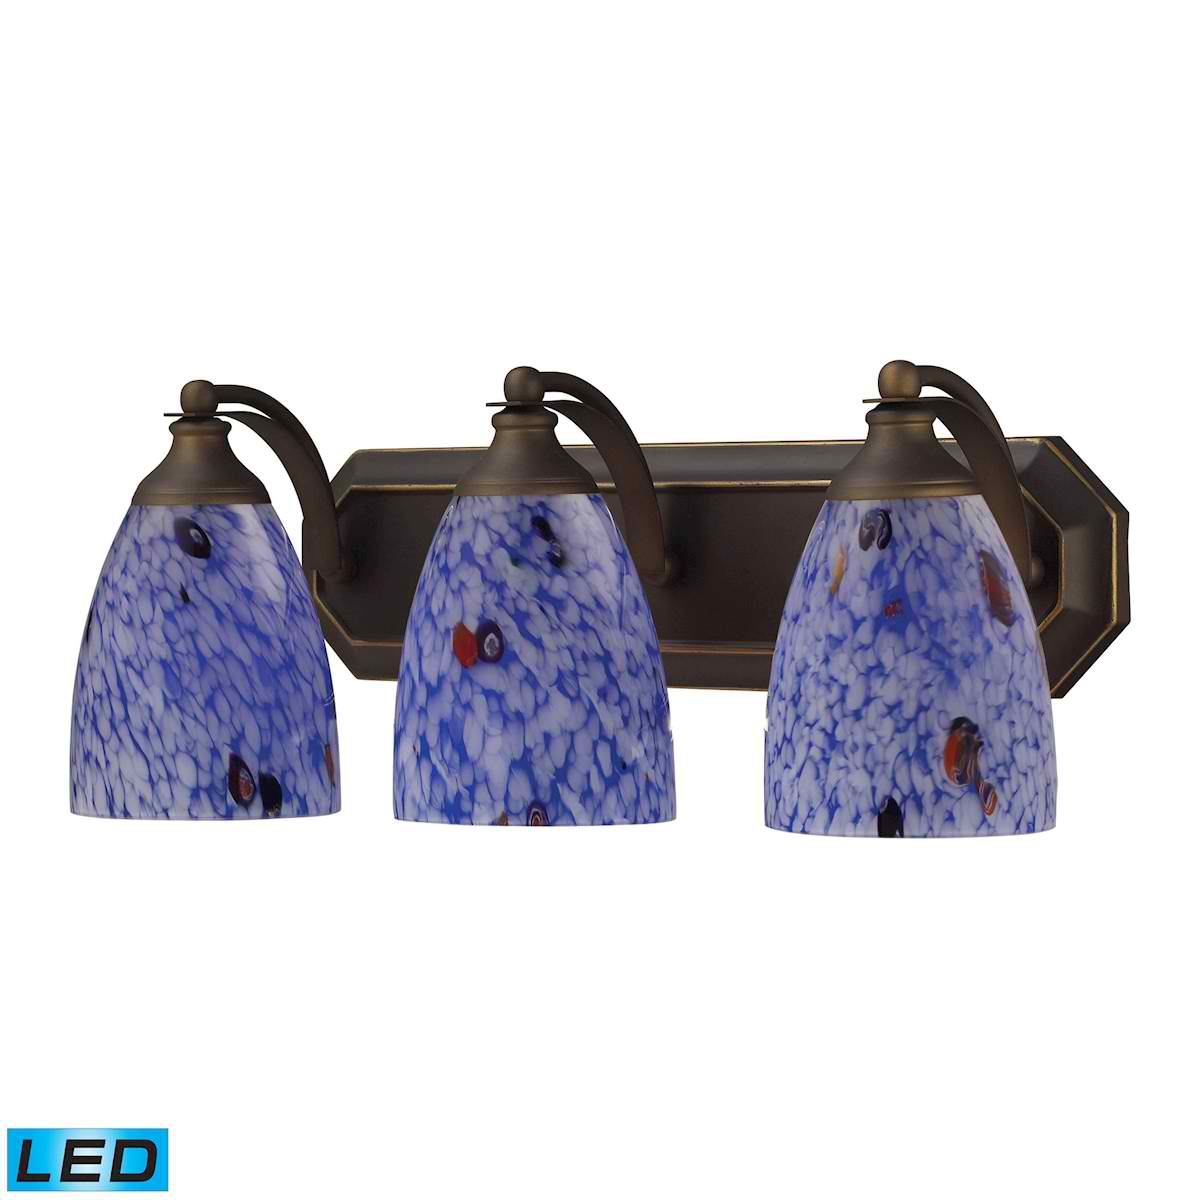 3 Light Vanity in Aged Bronze and Starburst Blue Glass - LED, 800 Lumens (2400 Lumens Total) with Full Scale